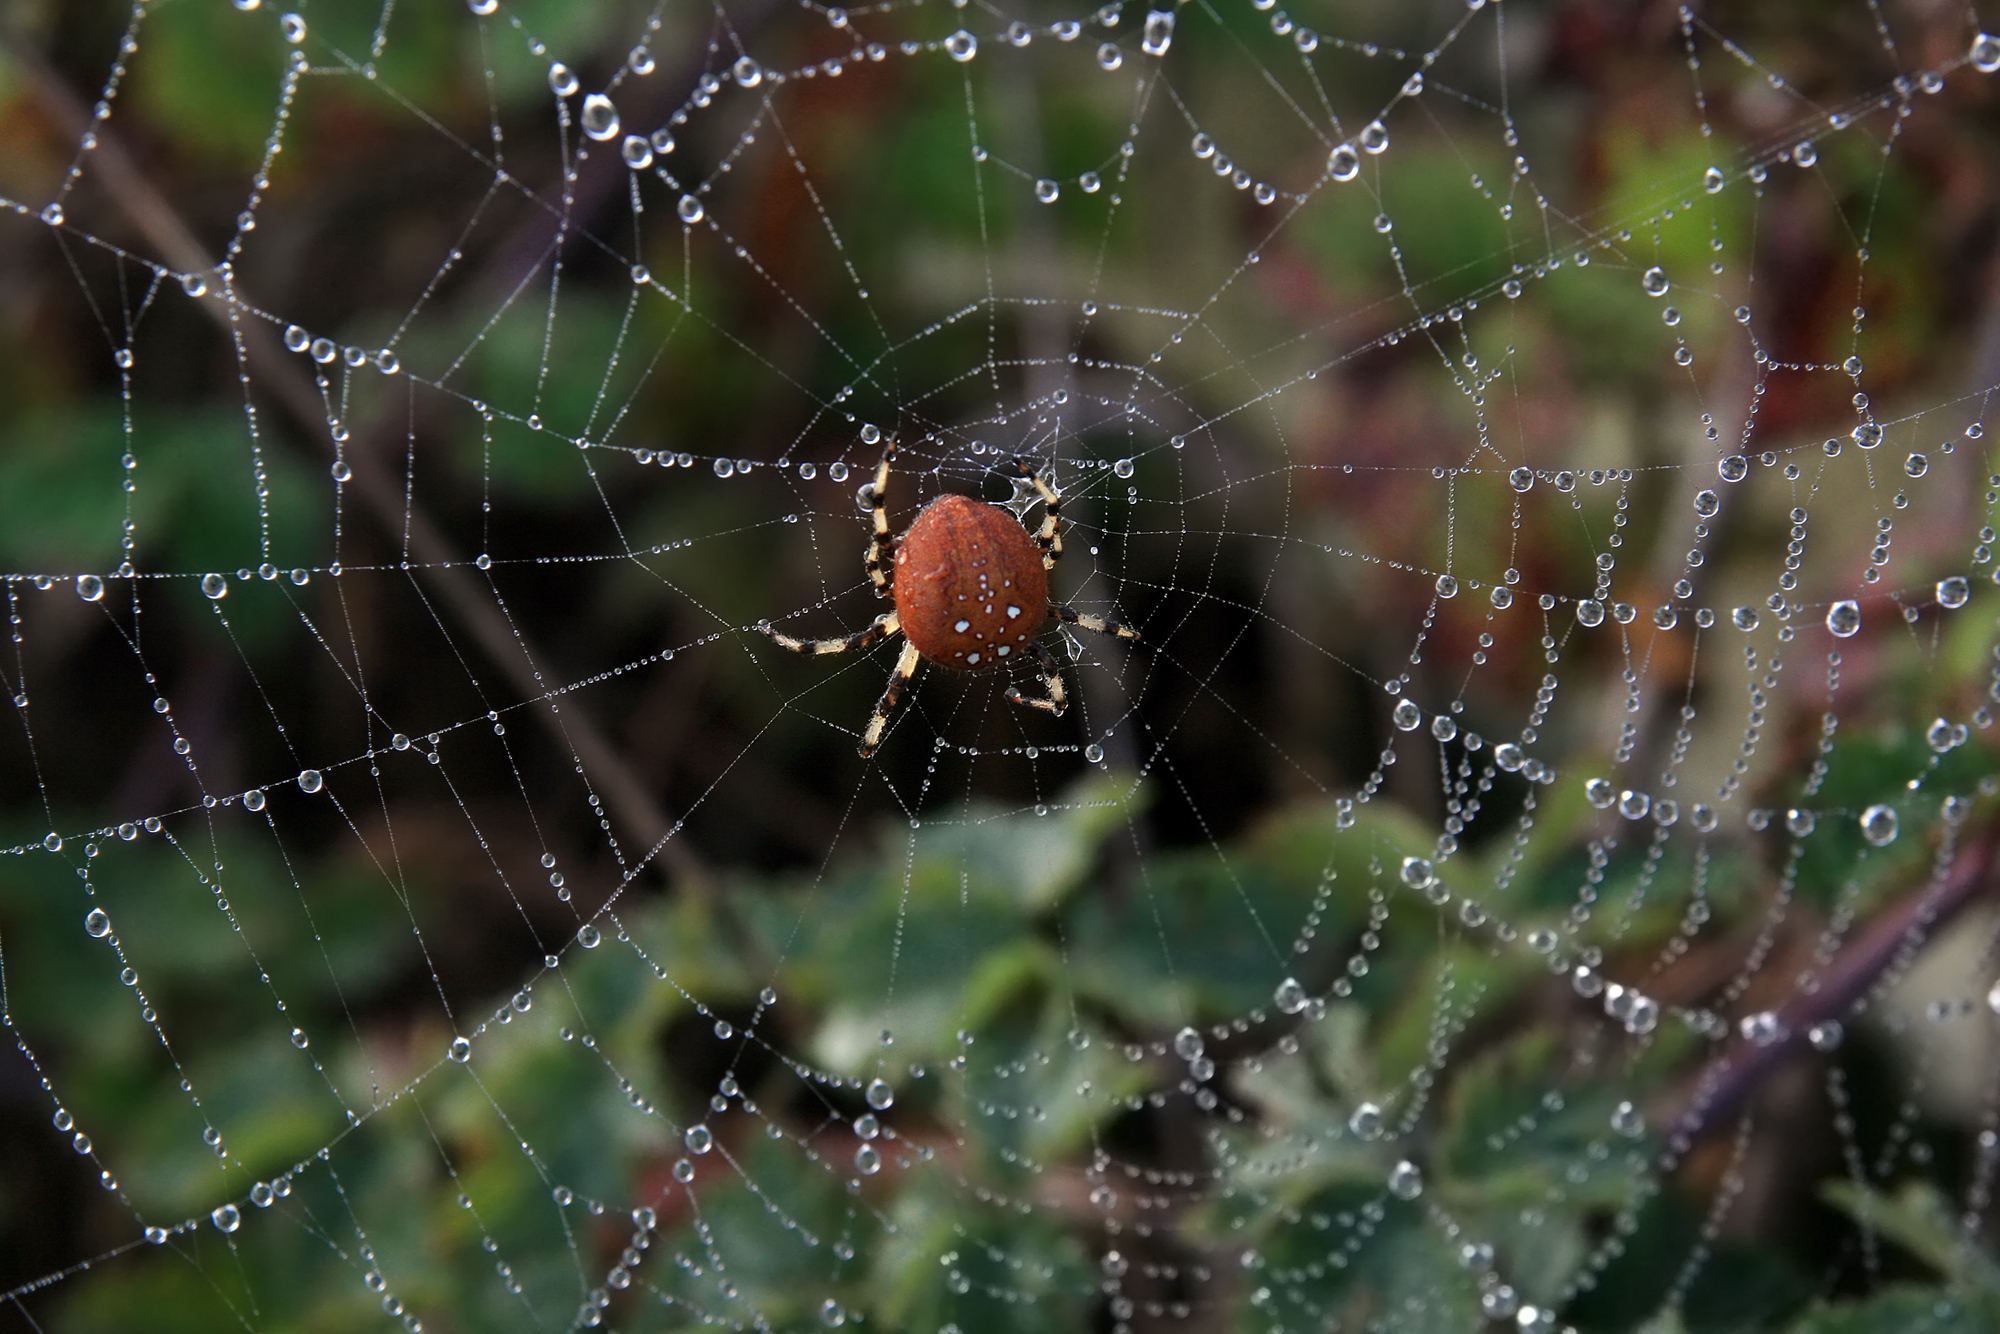 Spider web with fog droplets